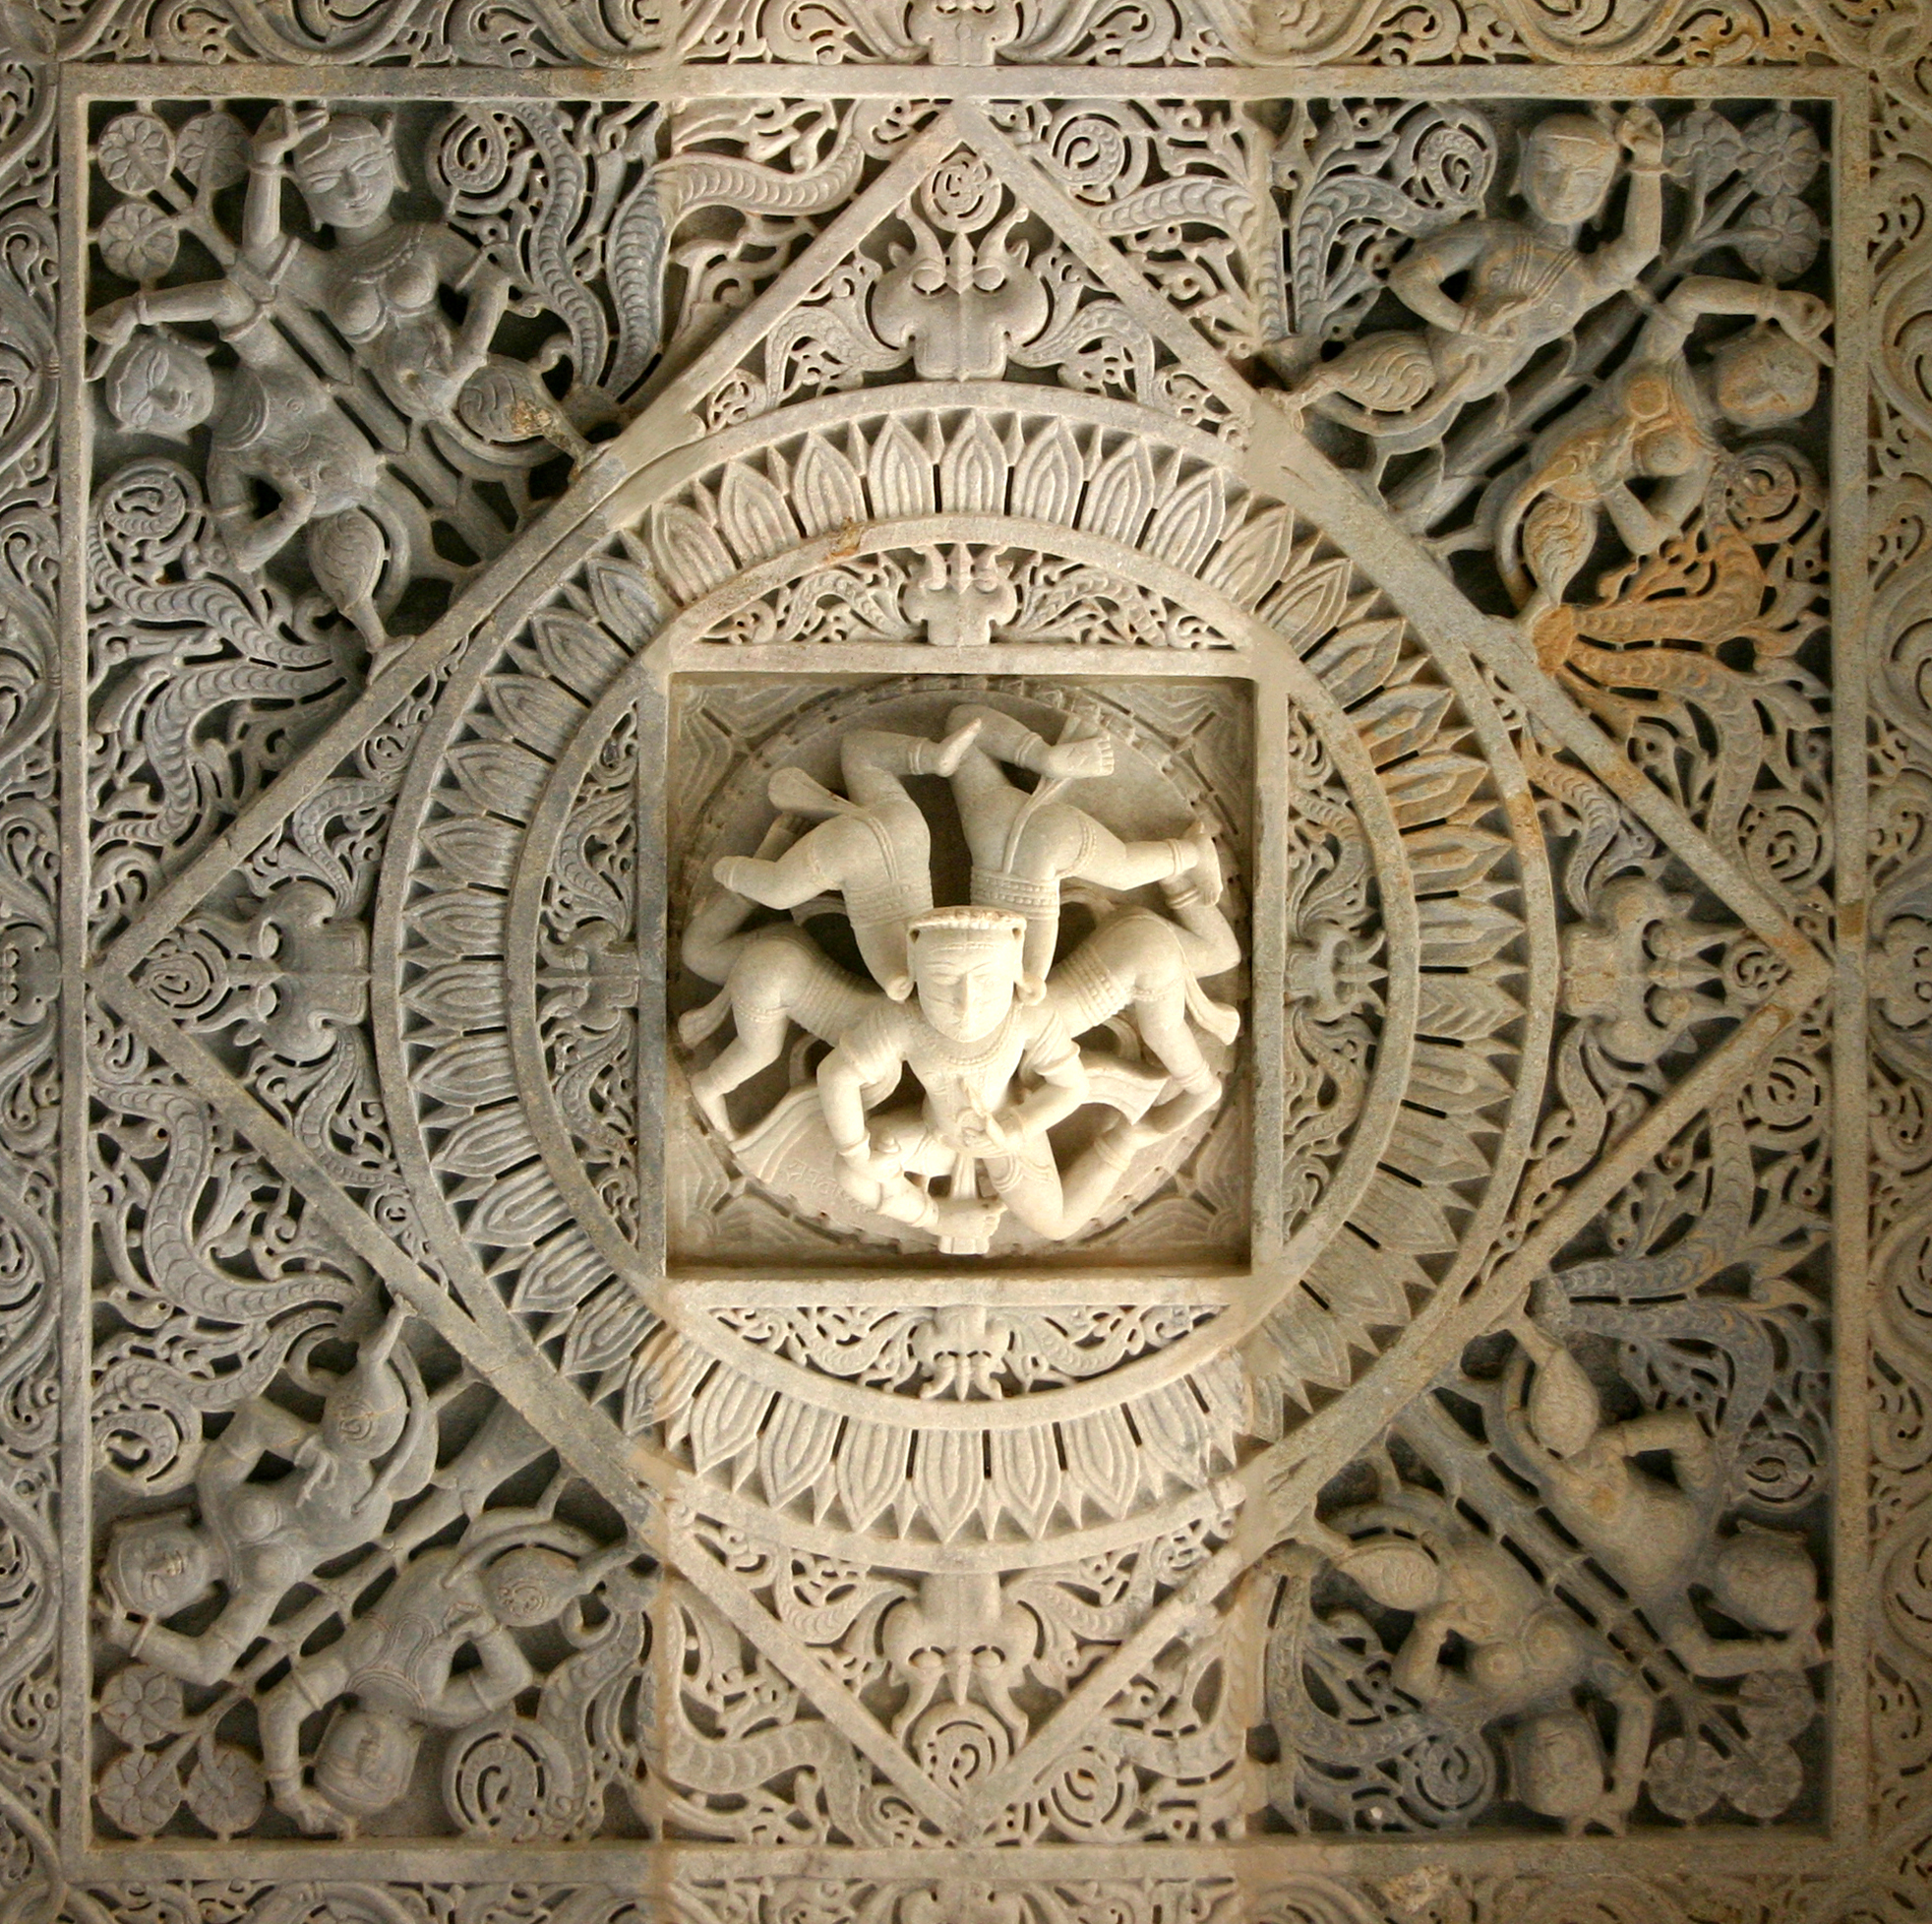 The depiction of akichaka, a bearded man with five bodies representing the five elements at Ranakpur Jain Temple